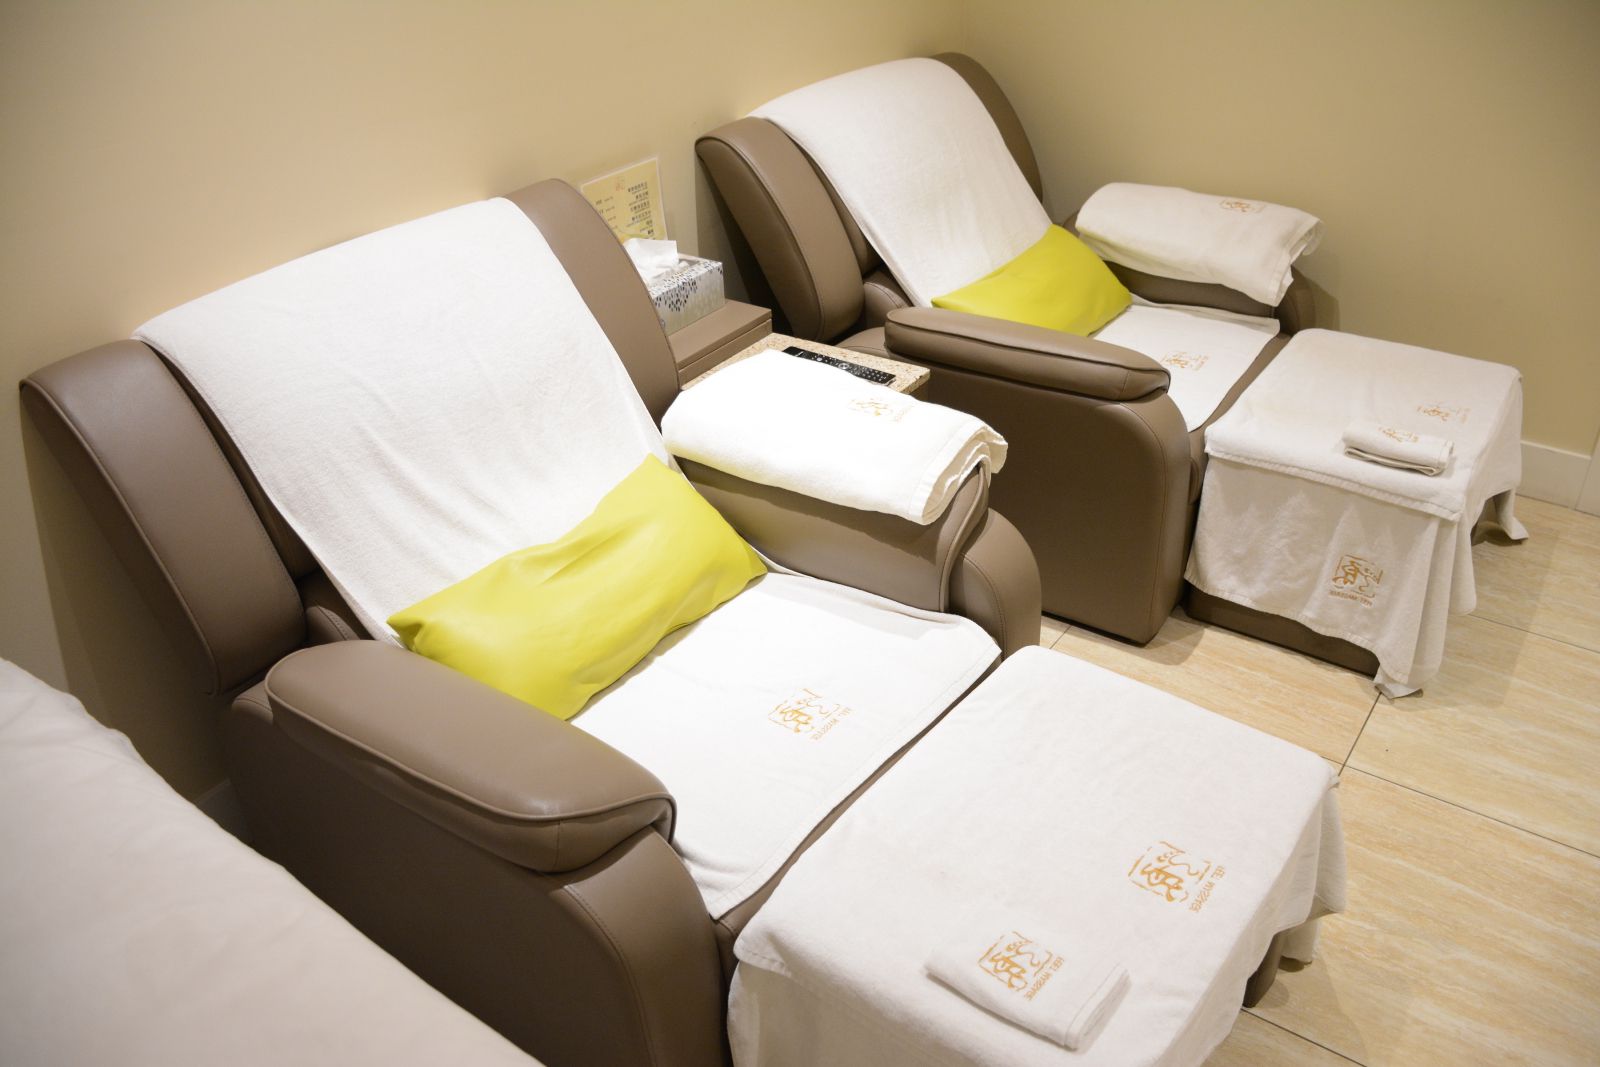 Home – Yuen Foot Massage & Nail Spa Throughout Most Popular Foot Massage Sofa Chairs (View 15 of 20)